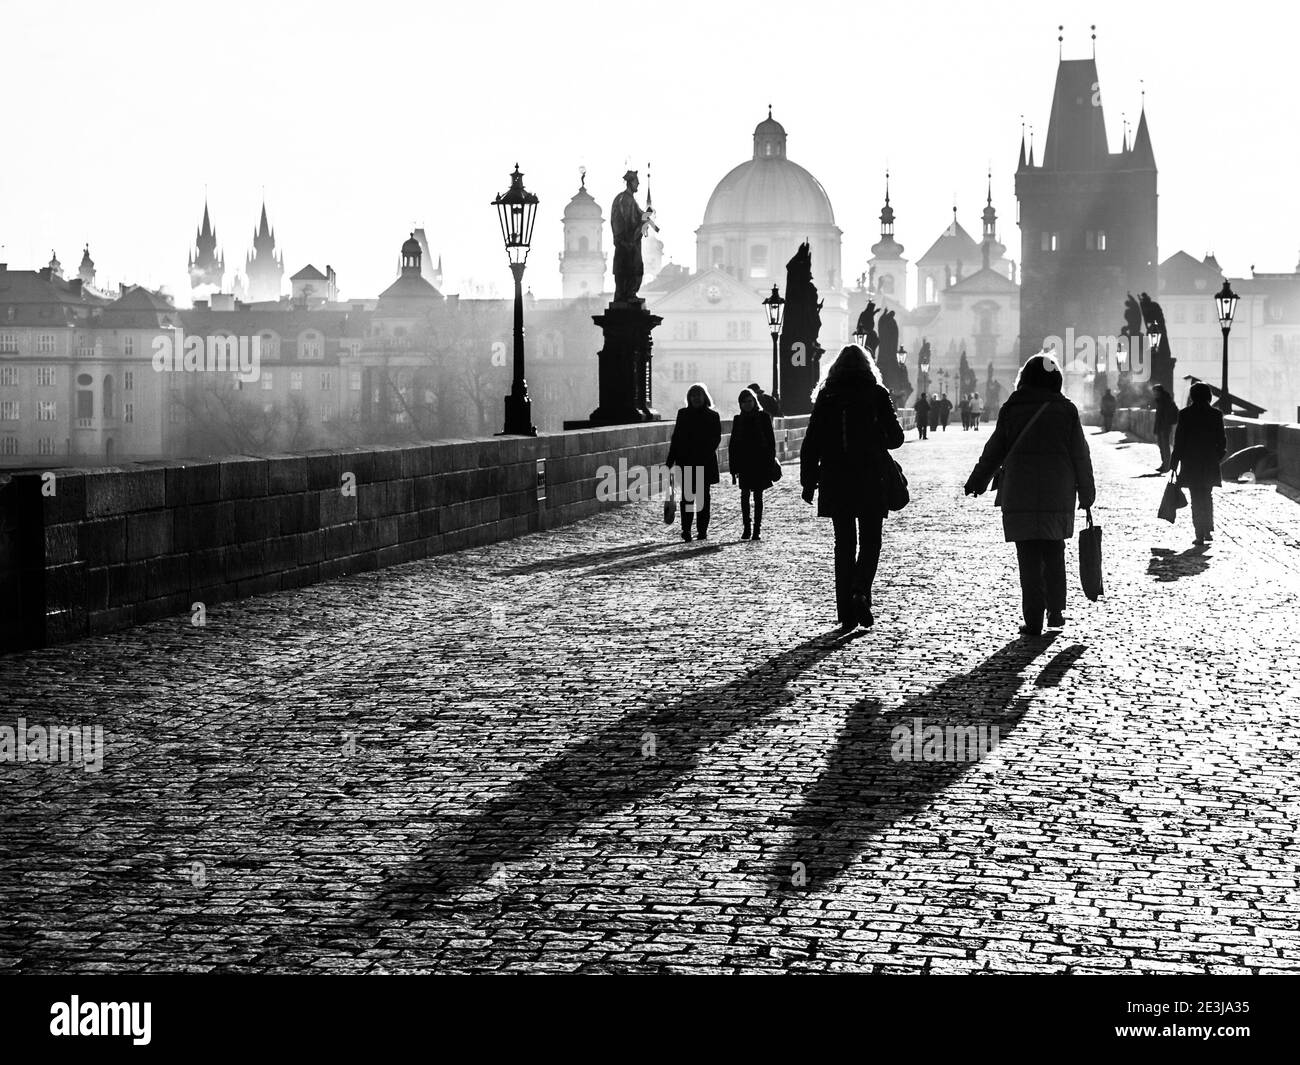 Foggy morning on Charles Bridge, Prague, Czech Republic. Sunrise with silhouettes of walking people, statues and Old Town towers. Romantic travel destionation. Black and white image. Stock Photo